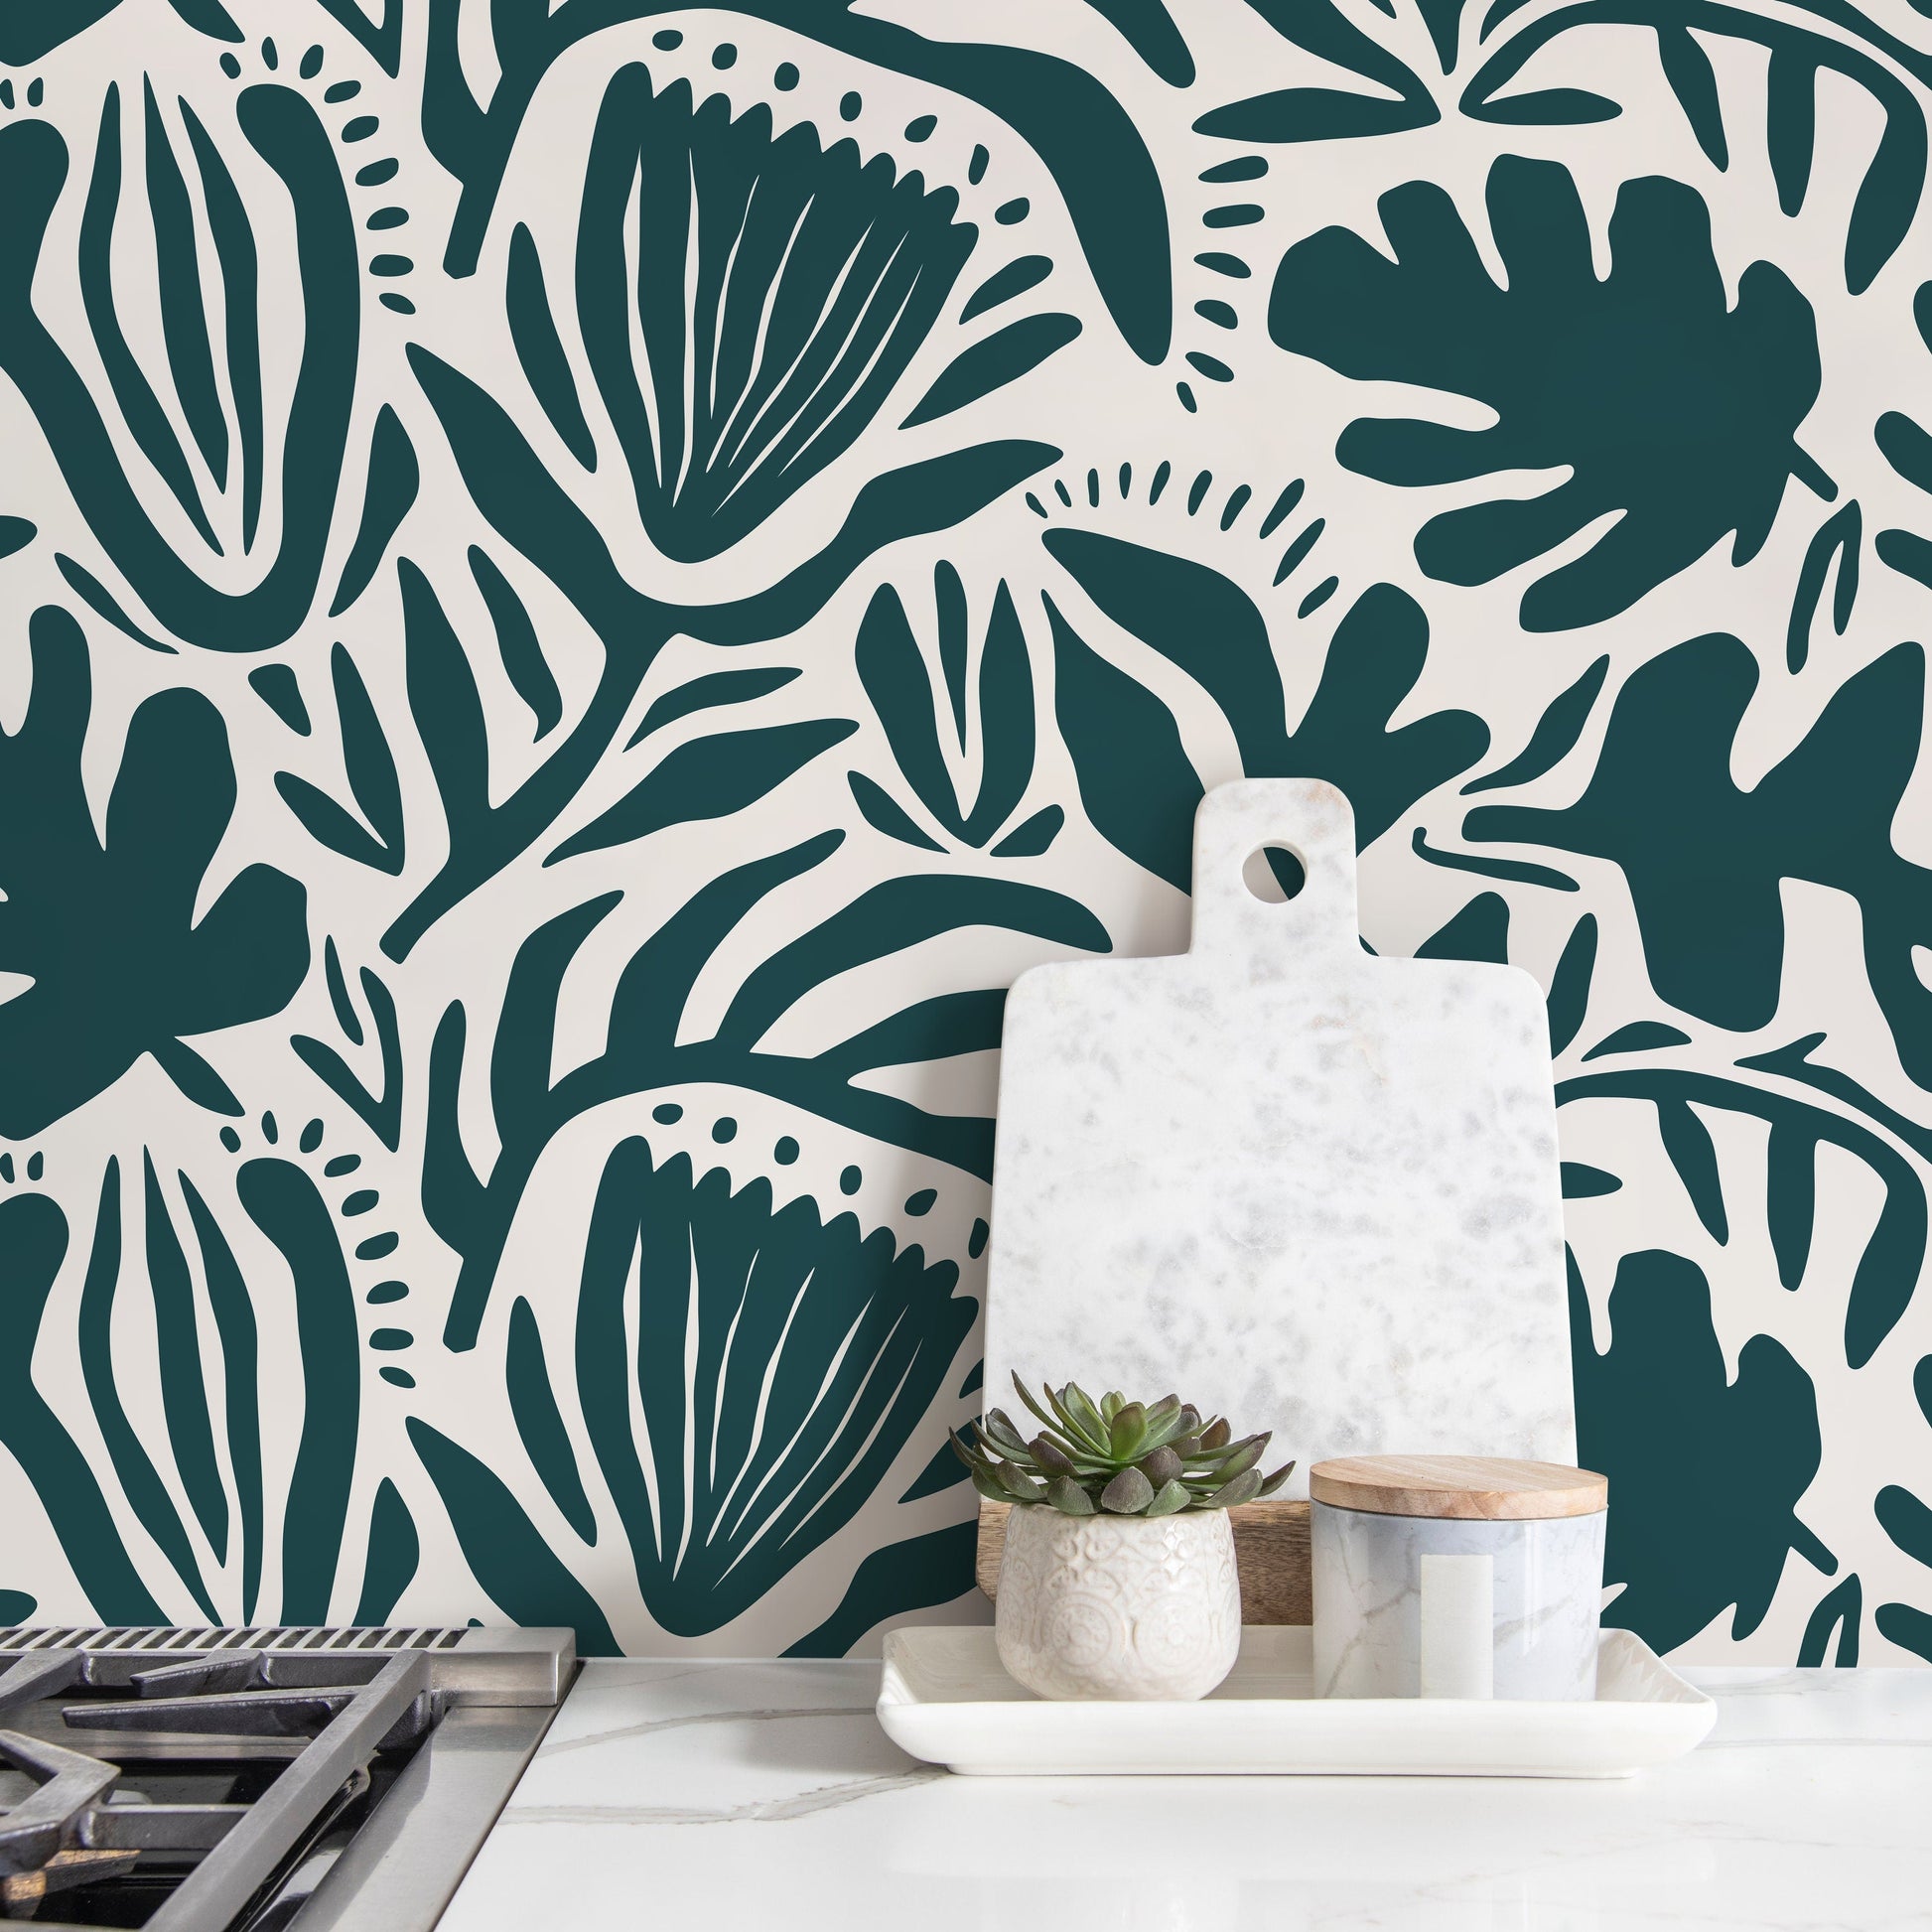 Abstract Floral Accent Stencil for Home Decor